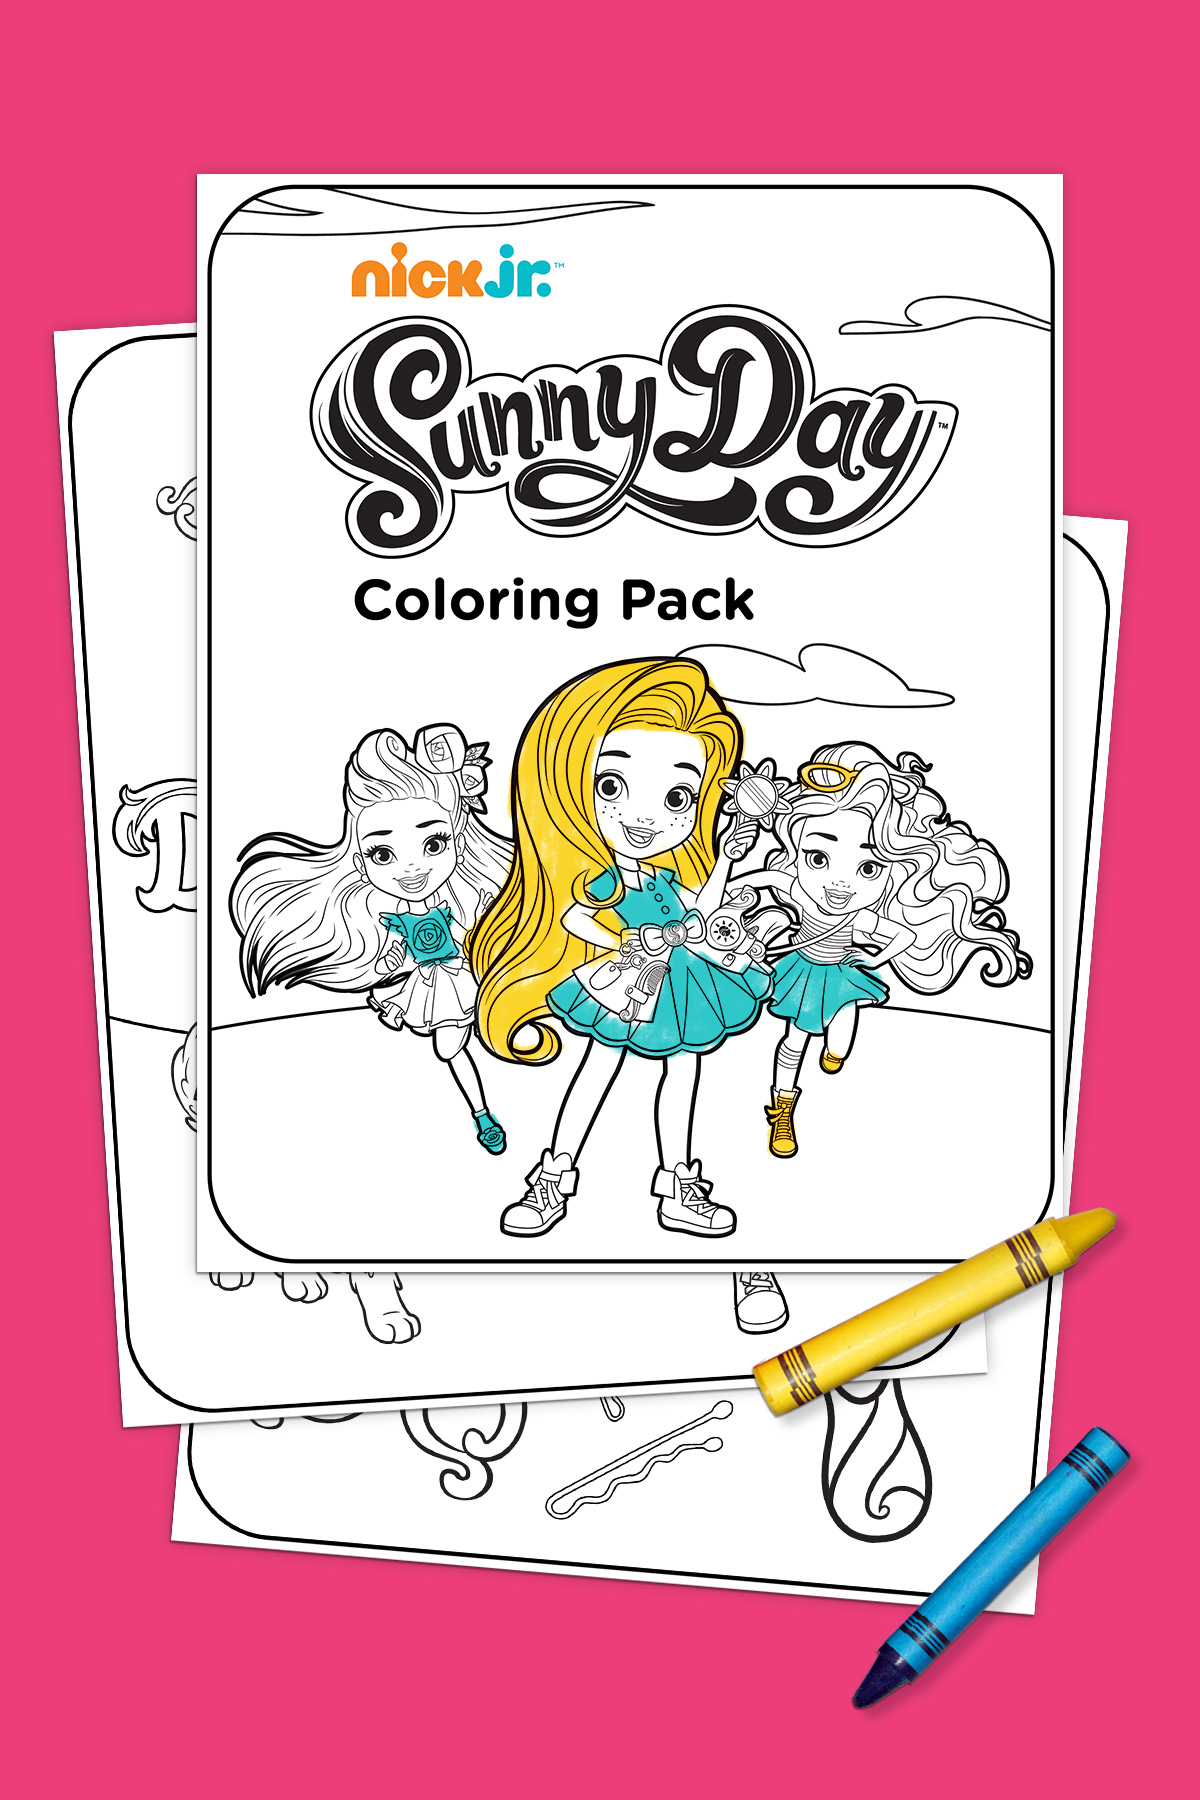 Sunny Day Coloring Pack   Nickelodeon Parents